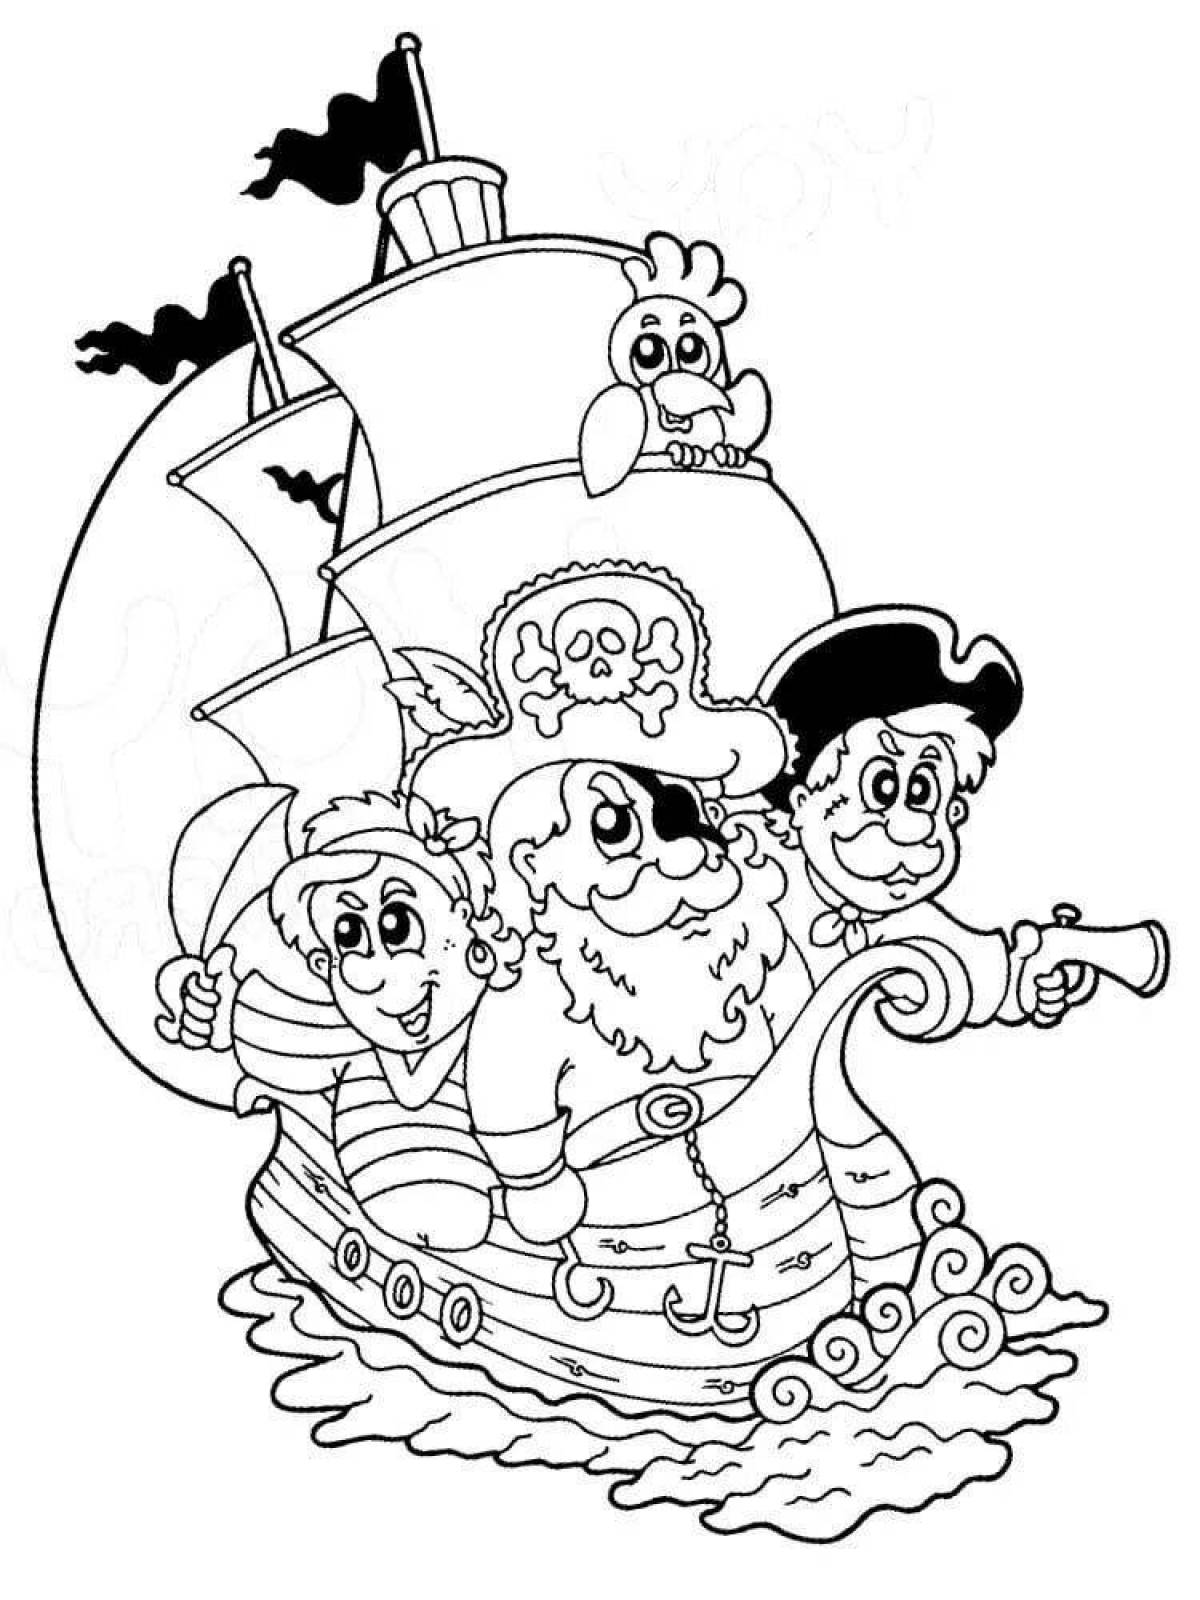 Fancy pirate coloring book